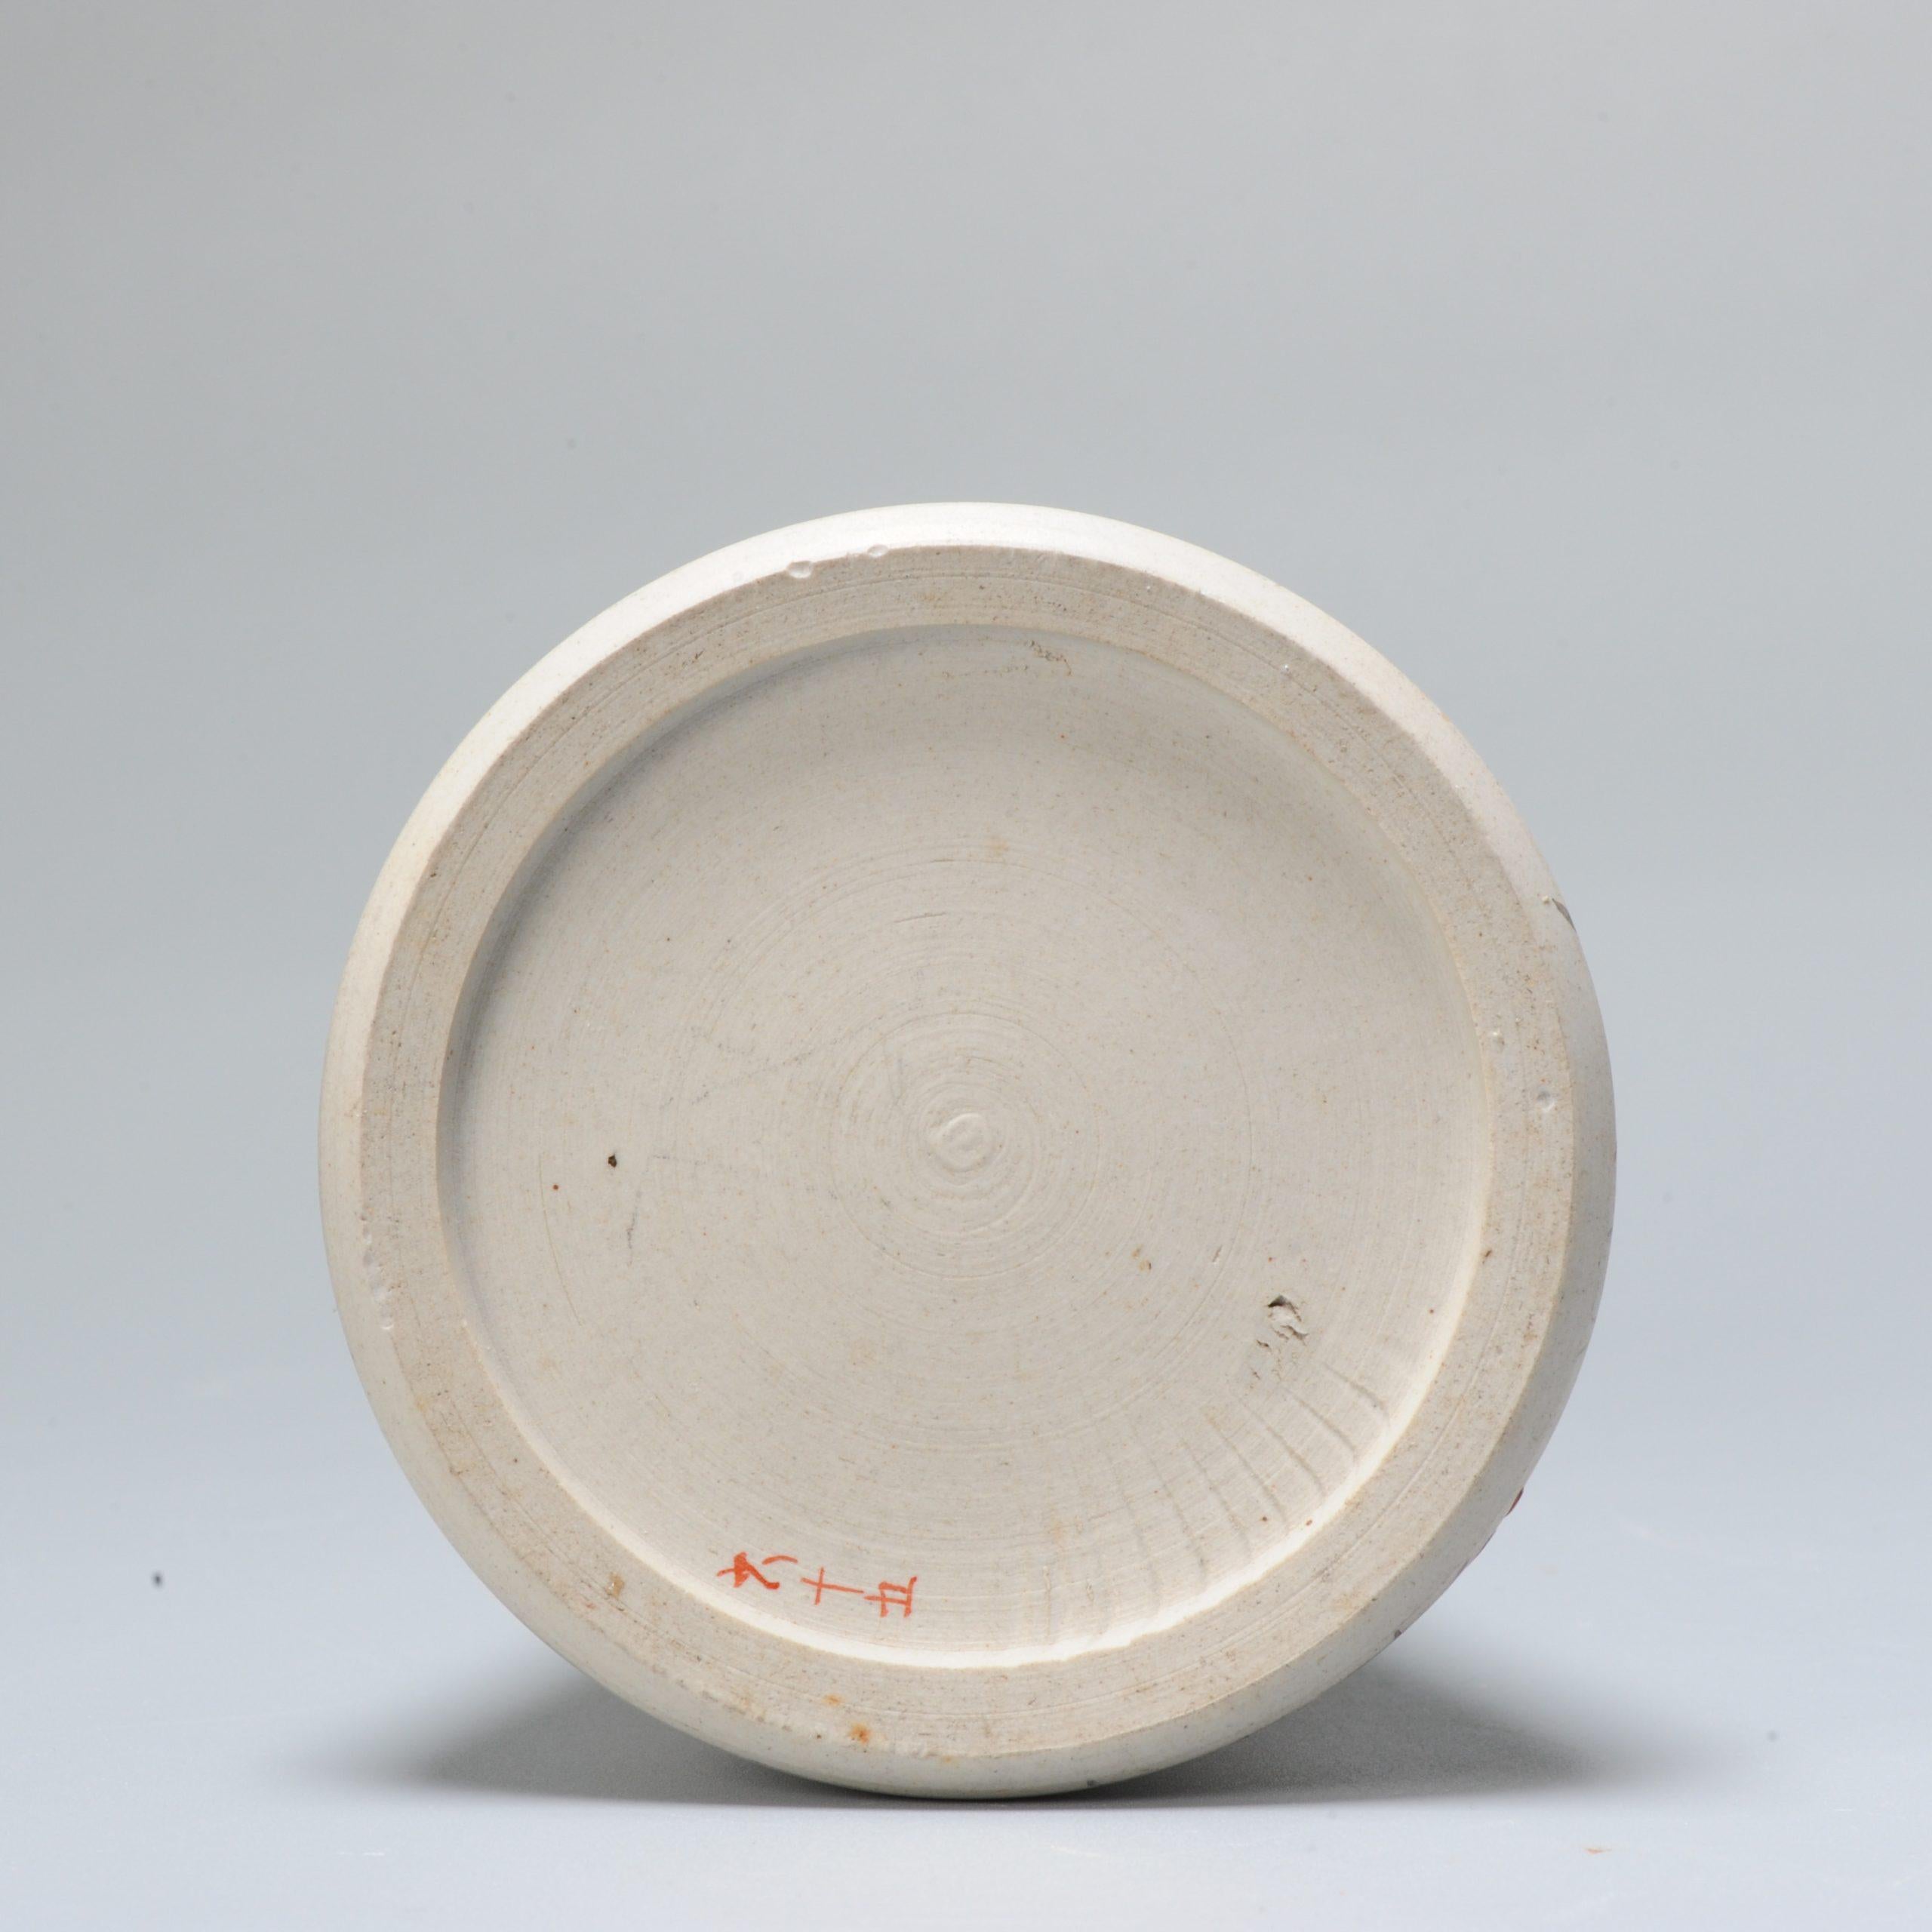 Porcelain Antique Japanese Banko Pottery Sake Bottle, Late 19th or Early 20th Century For Sale